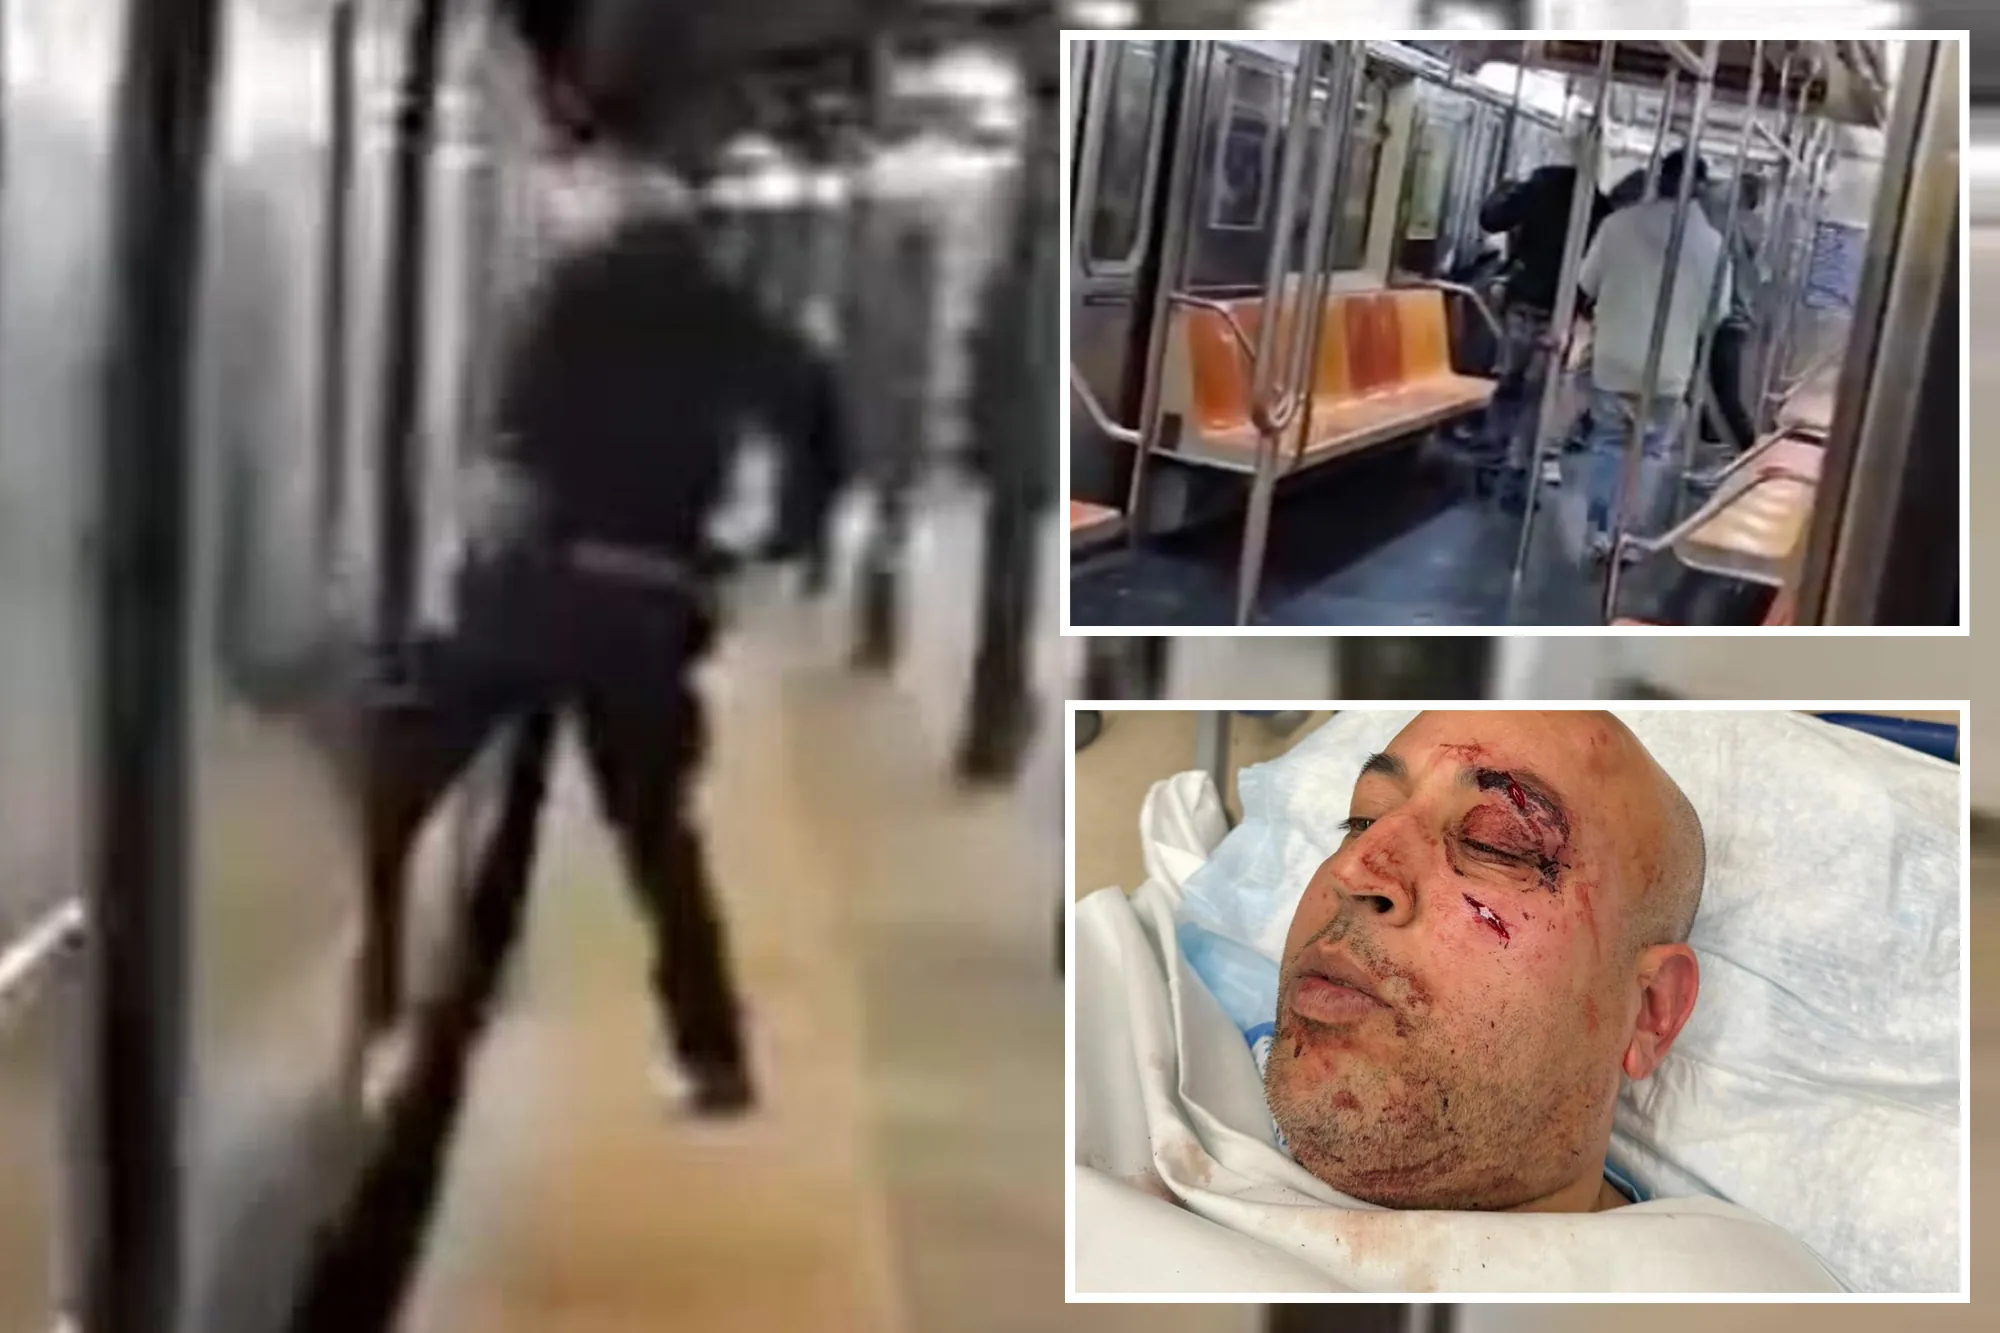 NYPD officer on desk duty after video showed he failed to help boss during subway beatdown